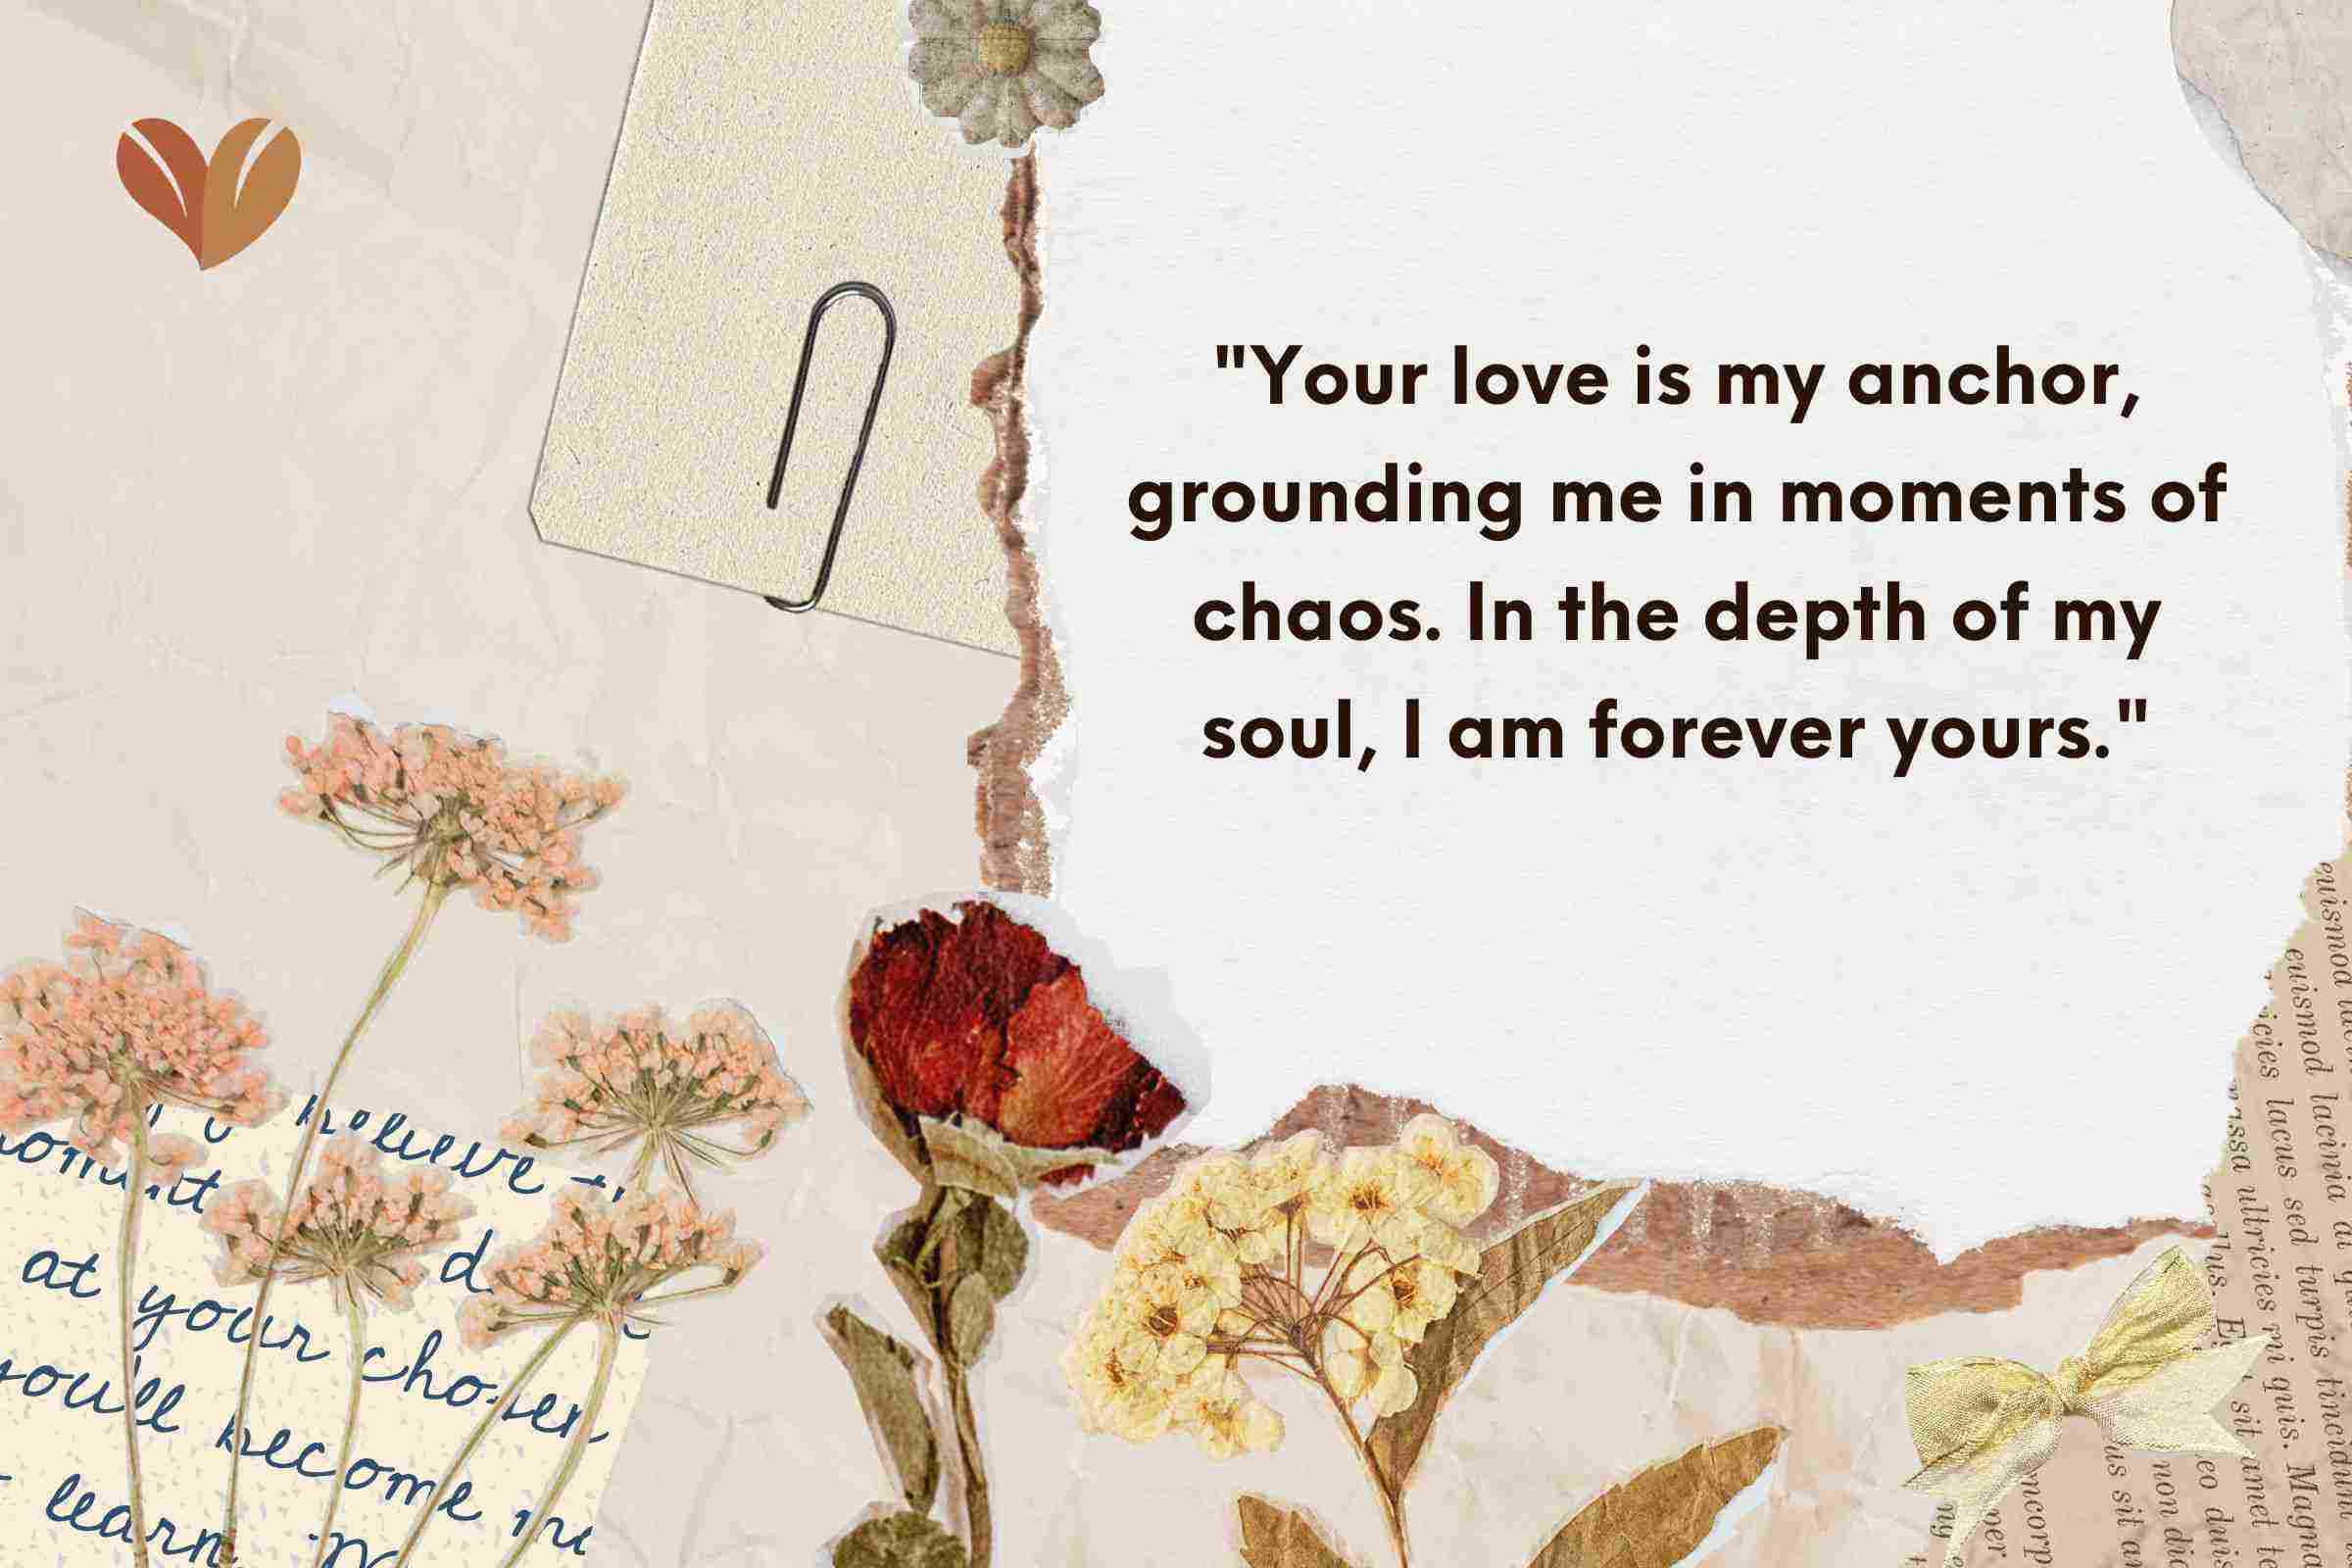 Your love is my anchor, grounding me in moments of chaos. In the depth of my soul, I am forever yours.